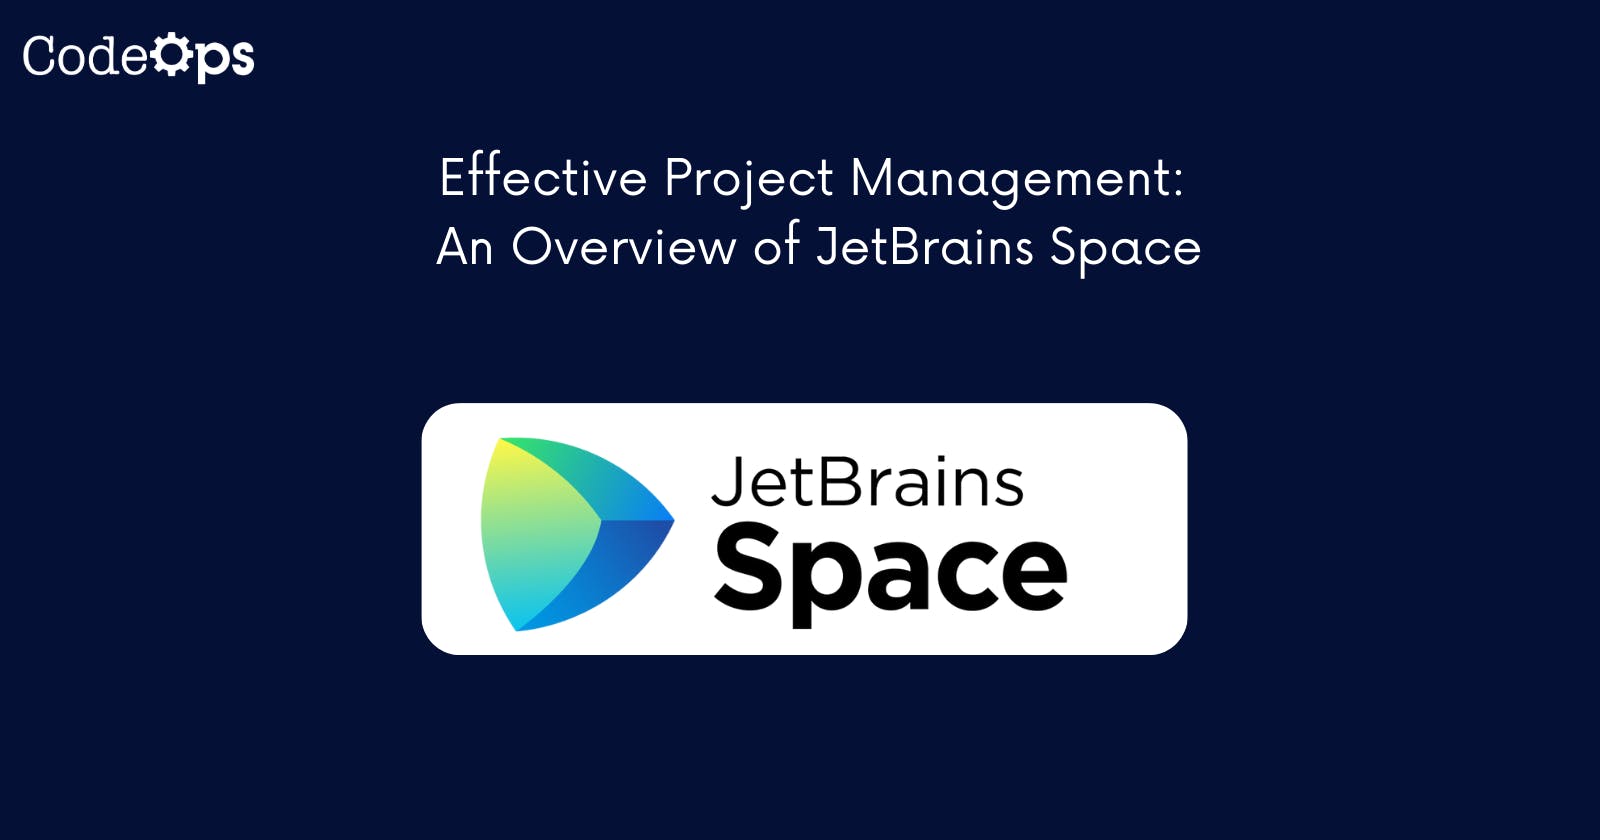 Effective Project Management: An Overview of JetBrains Space